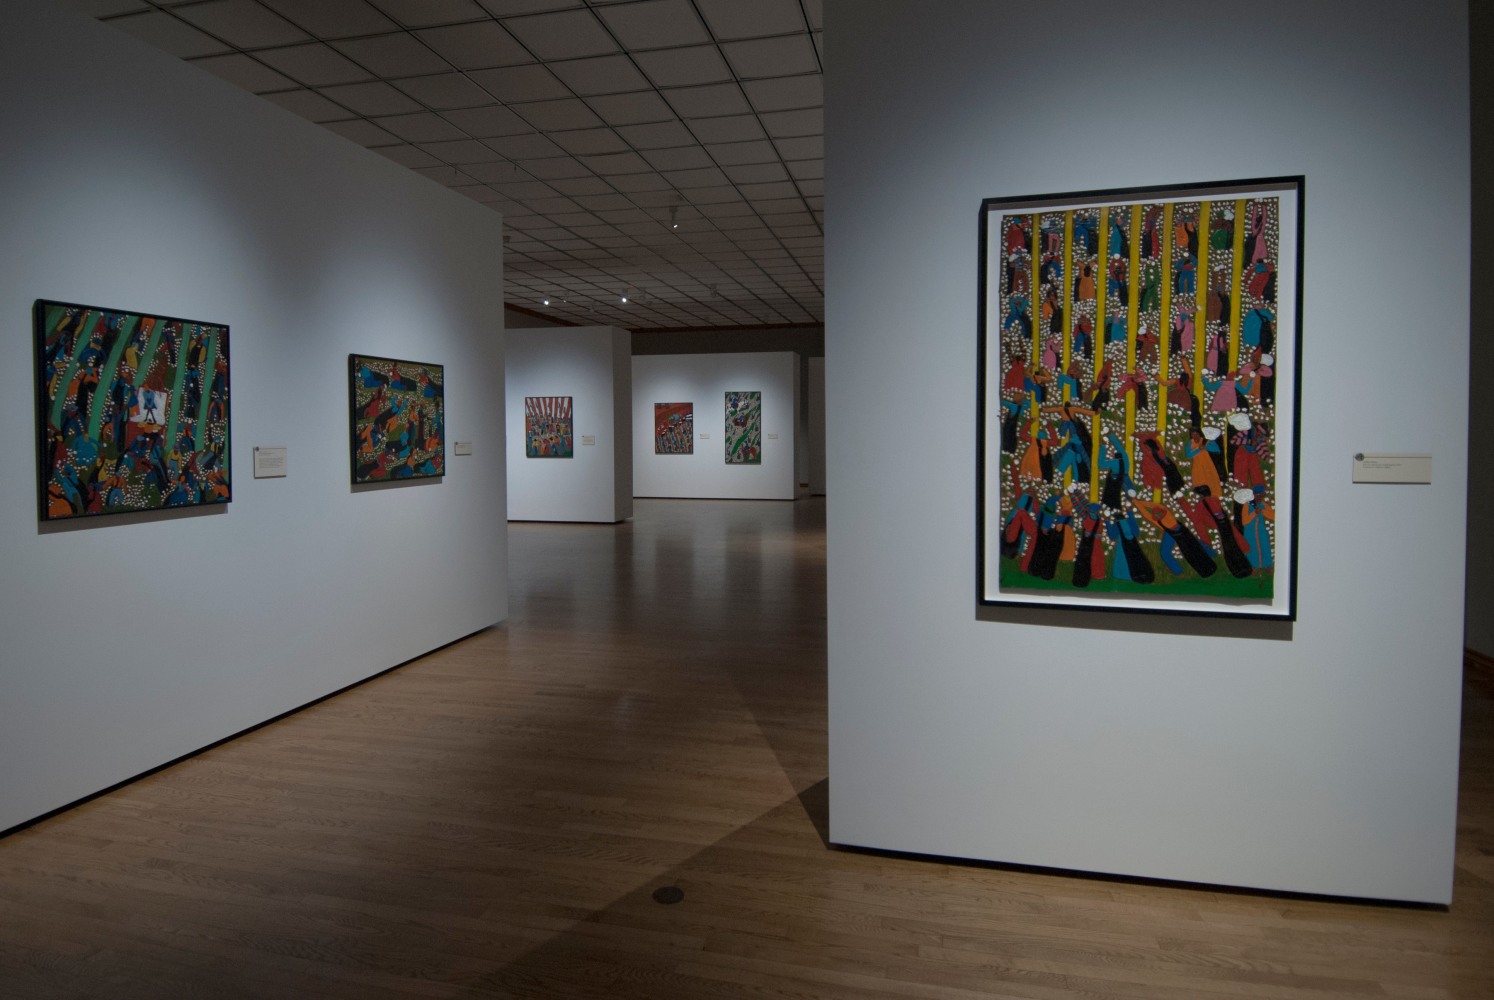 Southern Roots: The Paintings of Winfred Rembert, Muskegon Museum of&amp;nbsp;Art, Muskegon, MI, December 12, 2017- March 18, 2018. Photo: Art Martin.